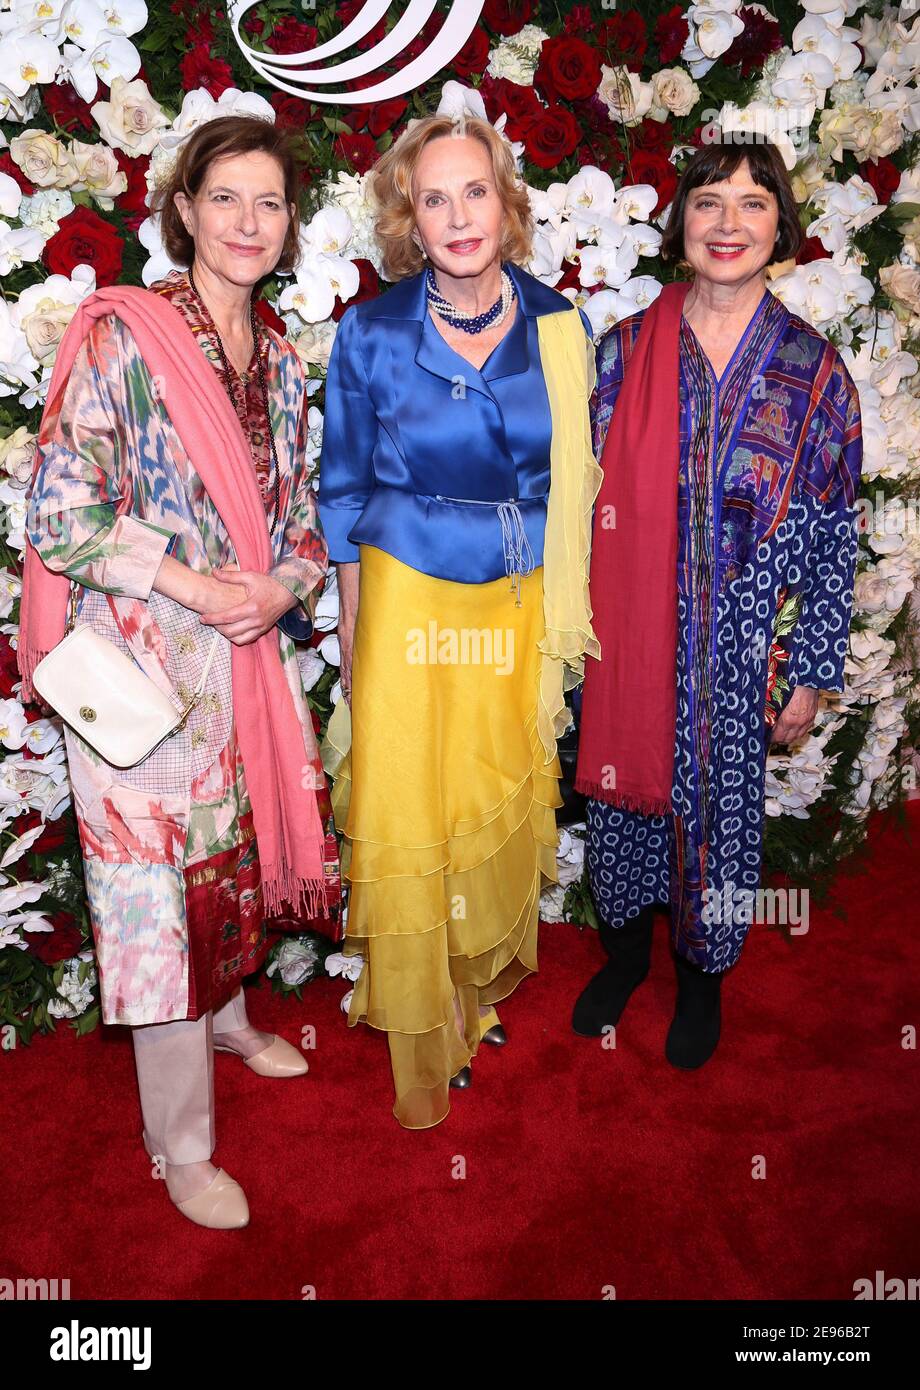 NEW YORK, NY- SEP 18: Isotta Ingrid Rossellini, Pia Lindstrom, and Isabella Rossellini arrive for the American Theatre Wing Centennial Gala held at Cipriani 42nd Street, on September 18, 2017, in New York City. Credit: Joseph Marzullo/MediaPunch Stock Photo